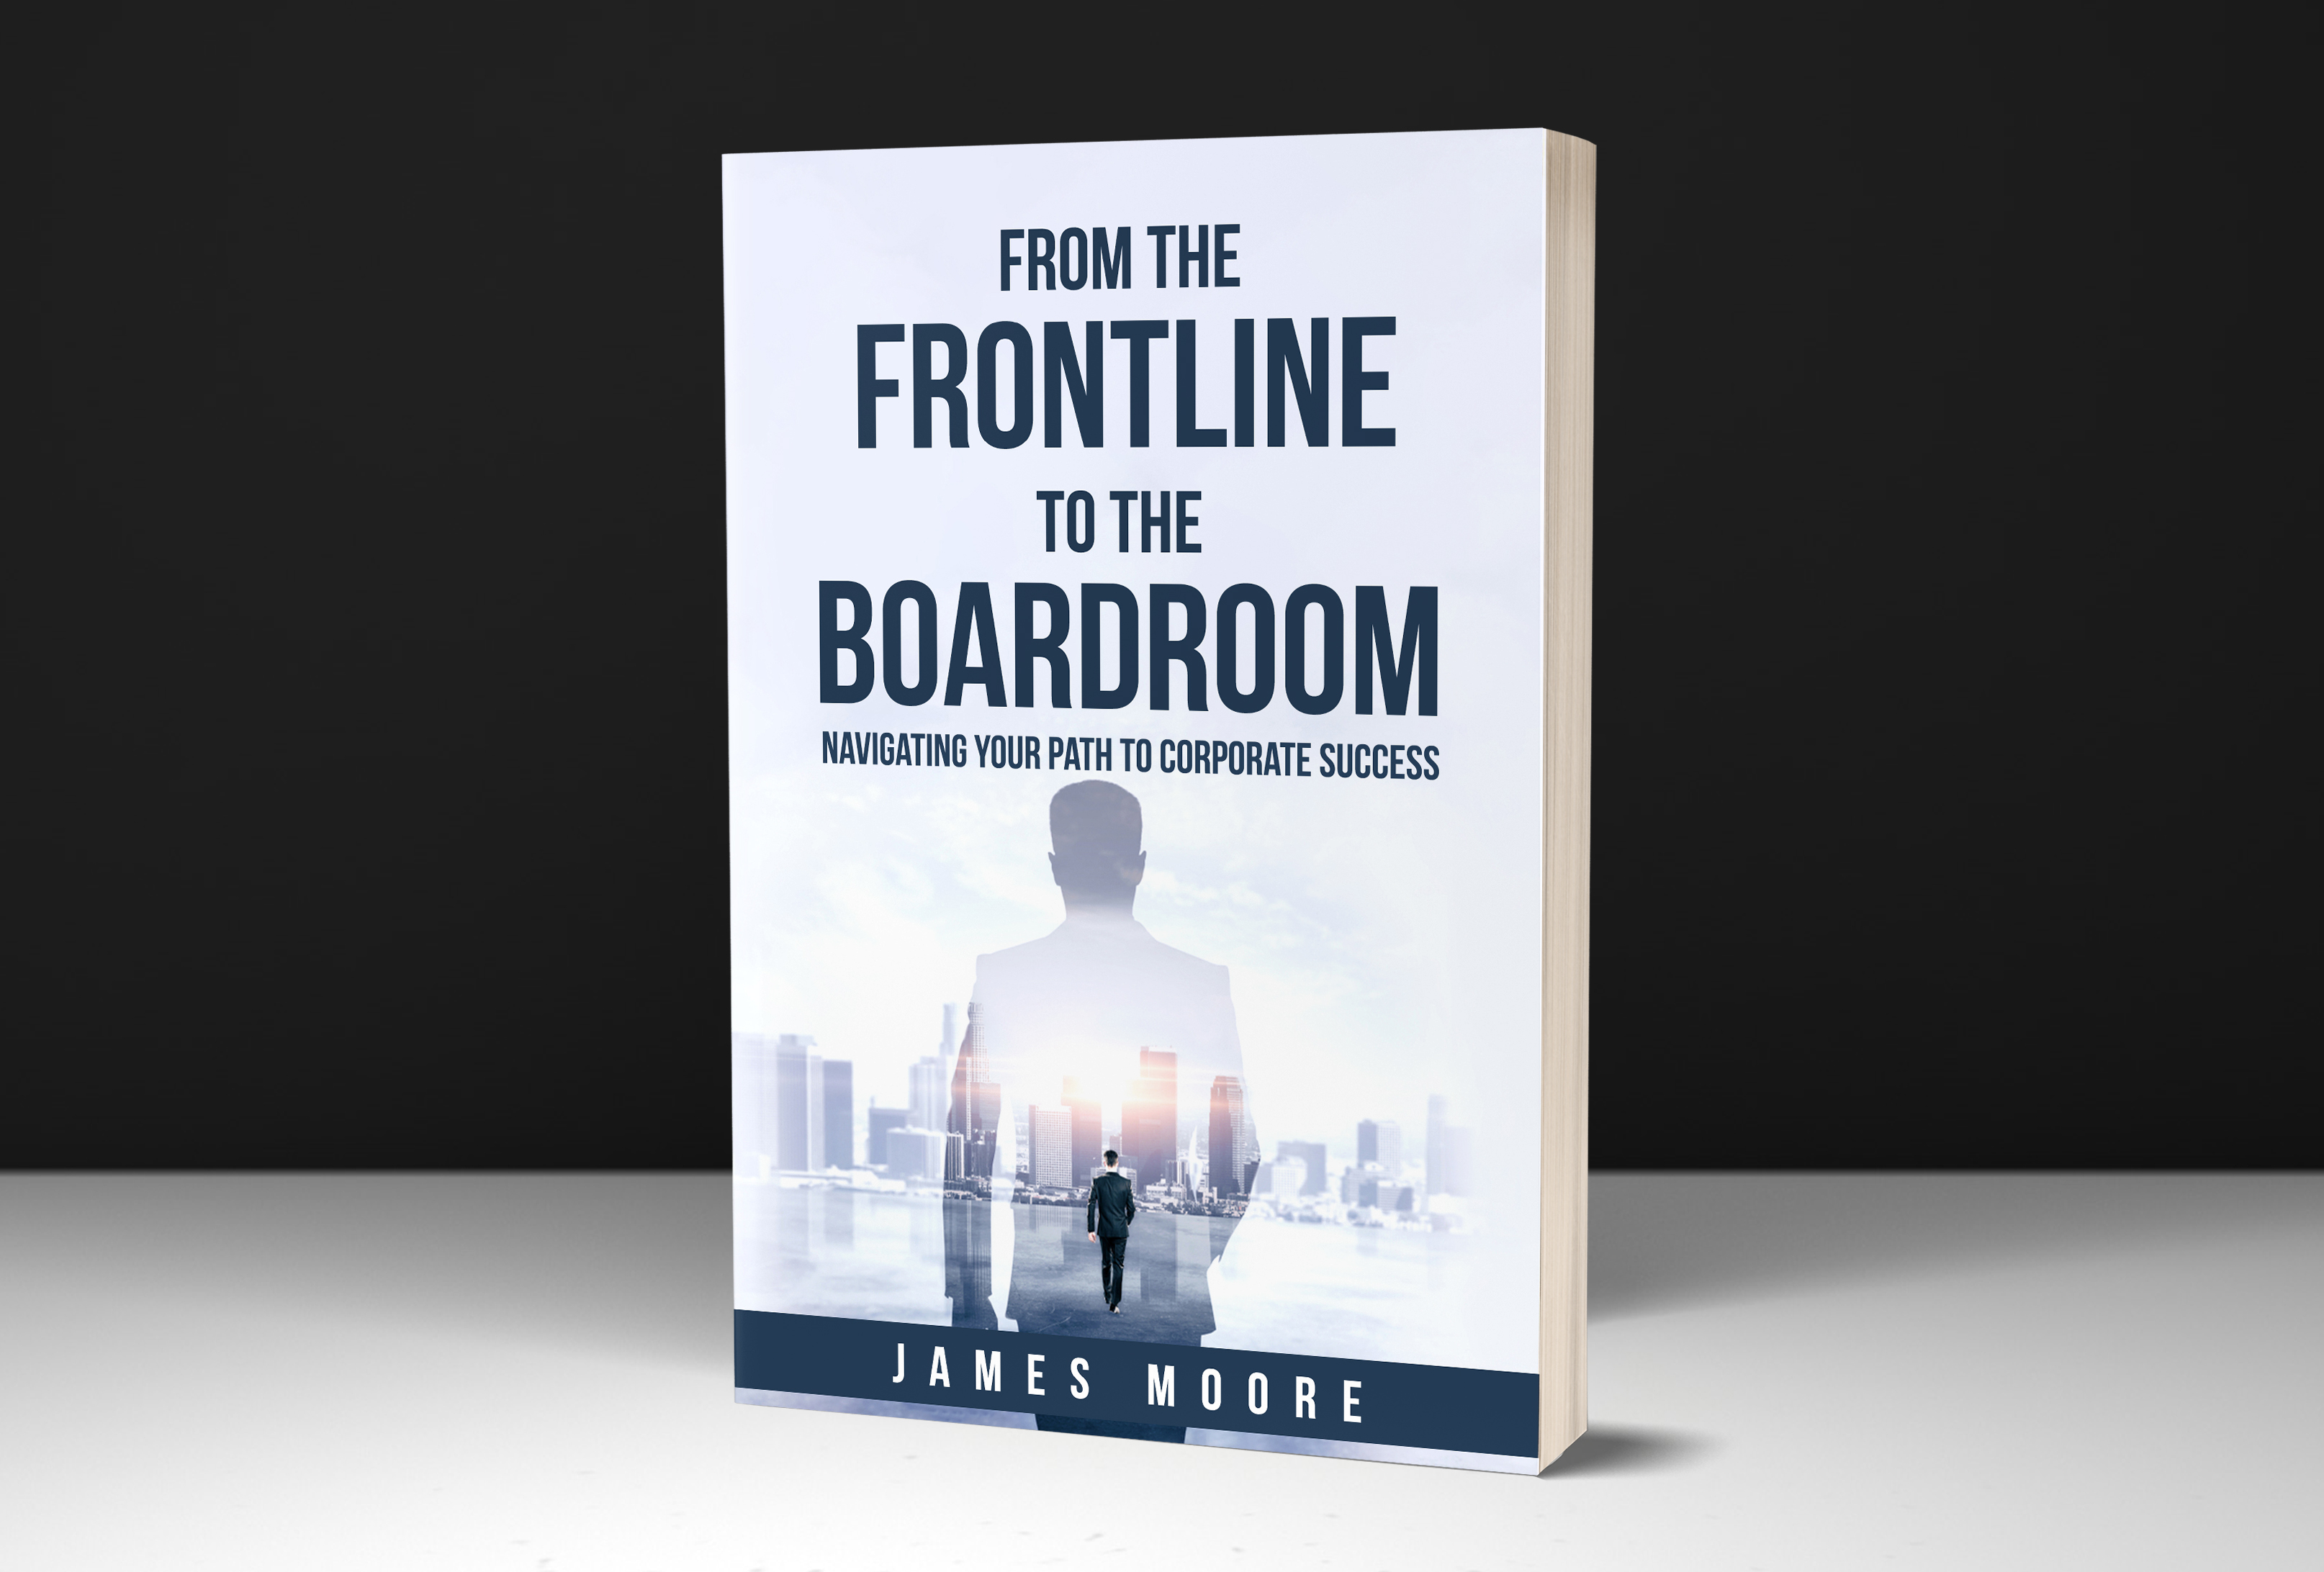 James Moore Releases New Book: "From the Frontline to the Boardroom: Navigating Your Path to Corporate Success" - A Beacon for Aspiring Professionals